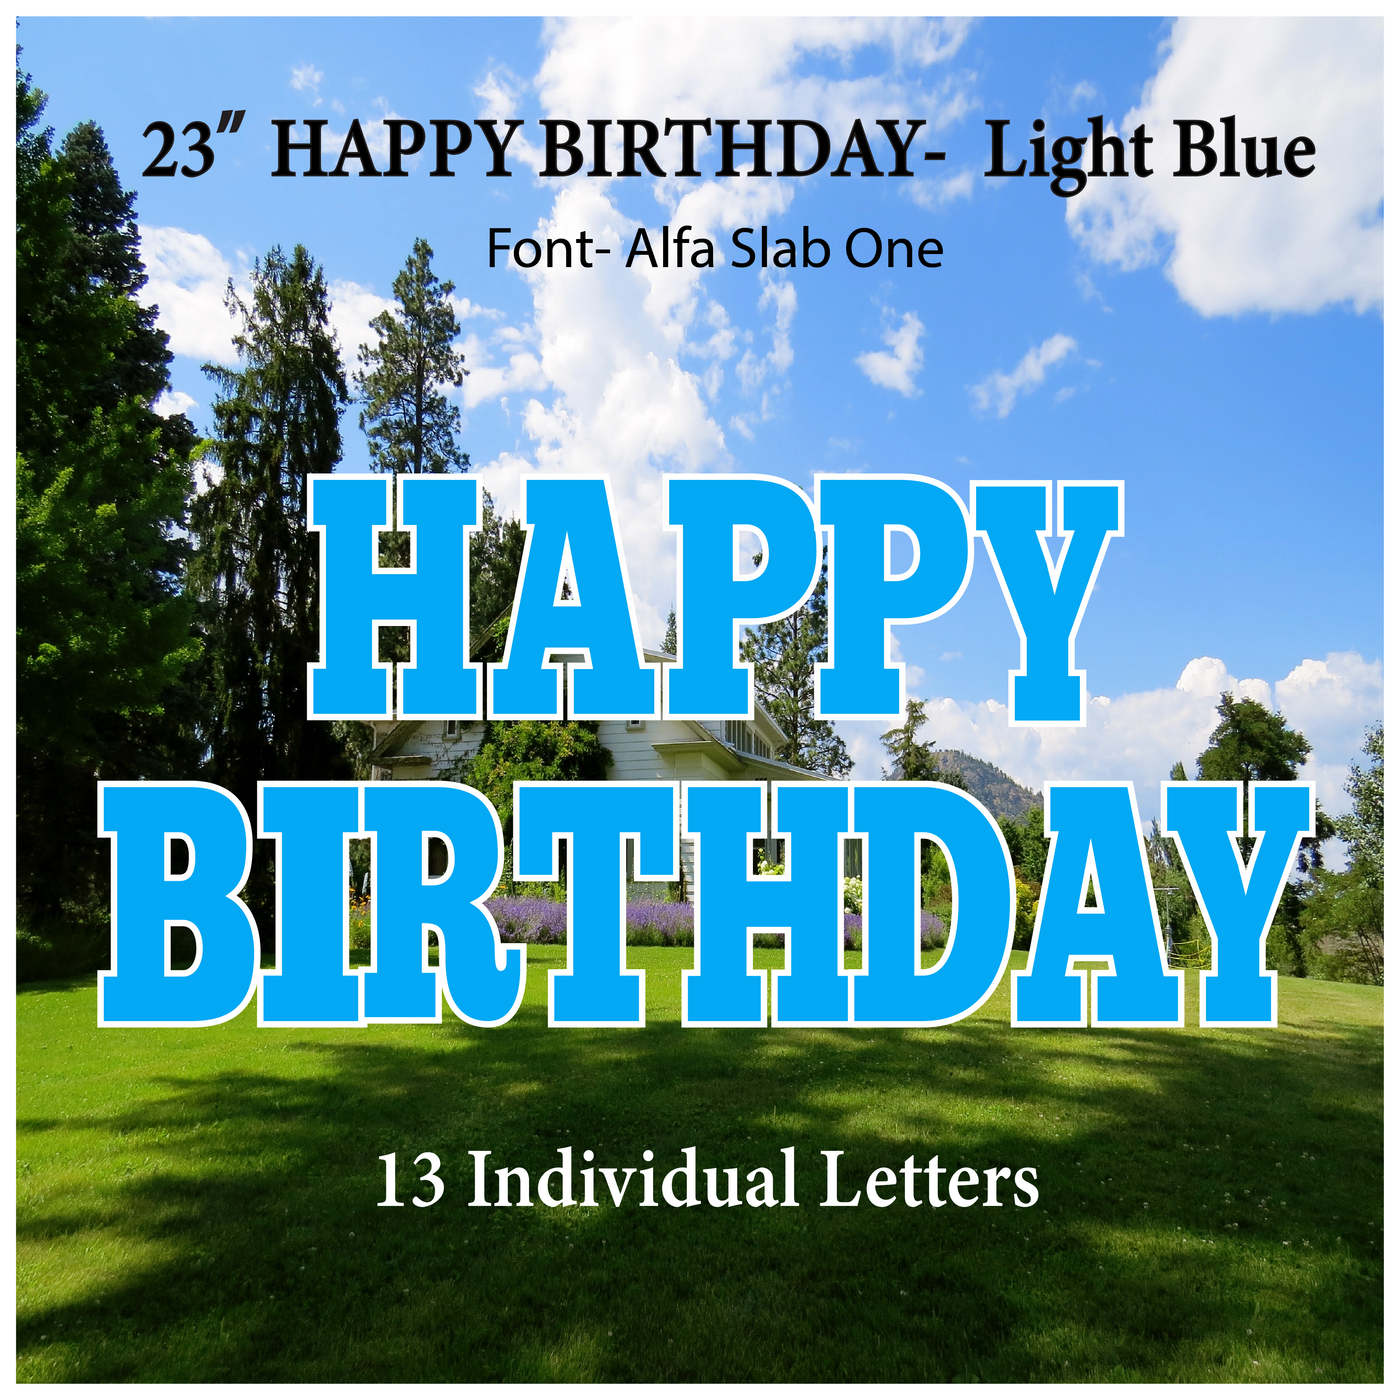 Solid Light Blue 23''HAPPY BIRTHDAY Including 13 Individual Letters